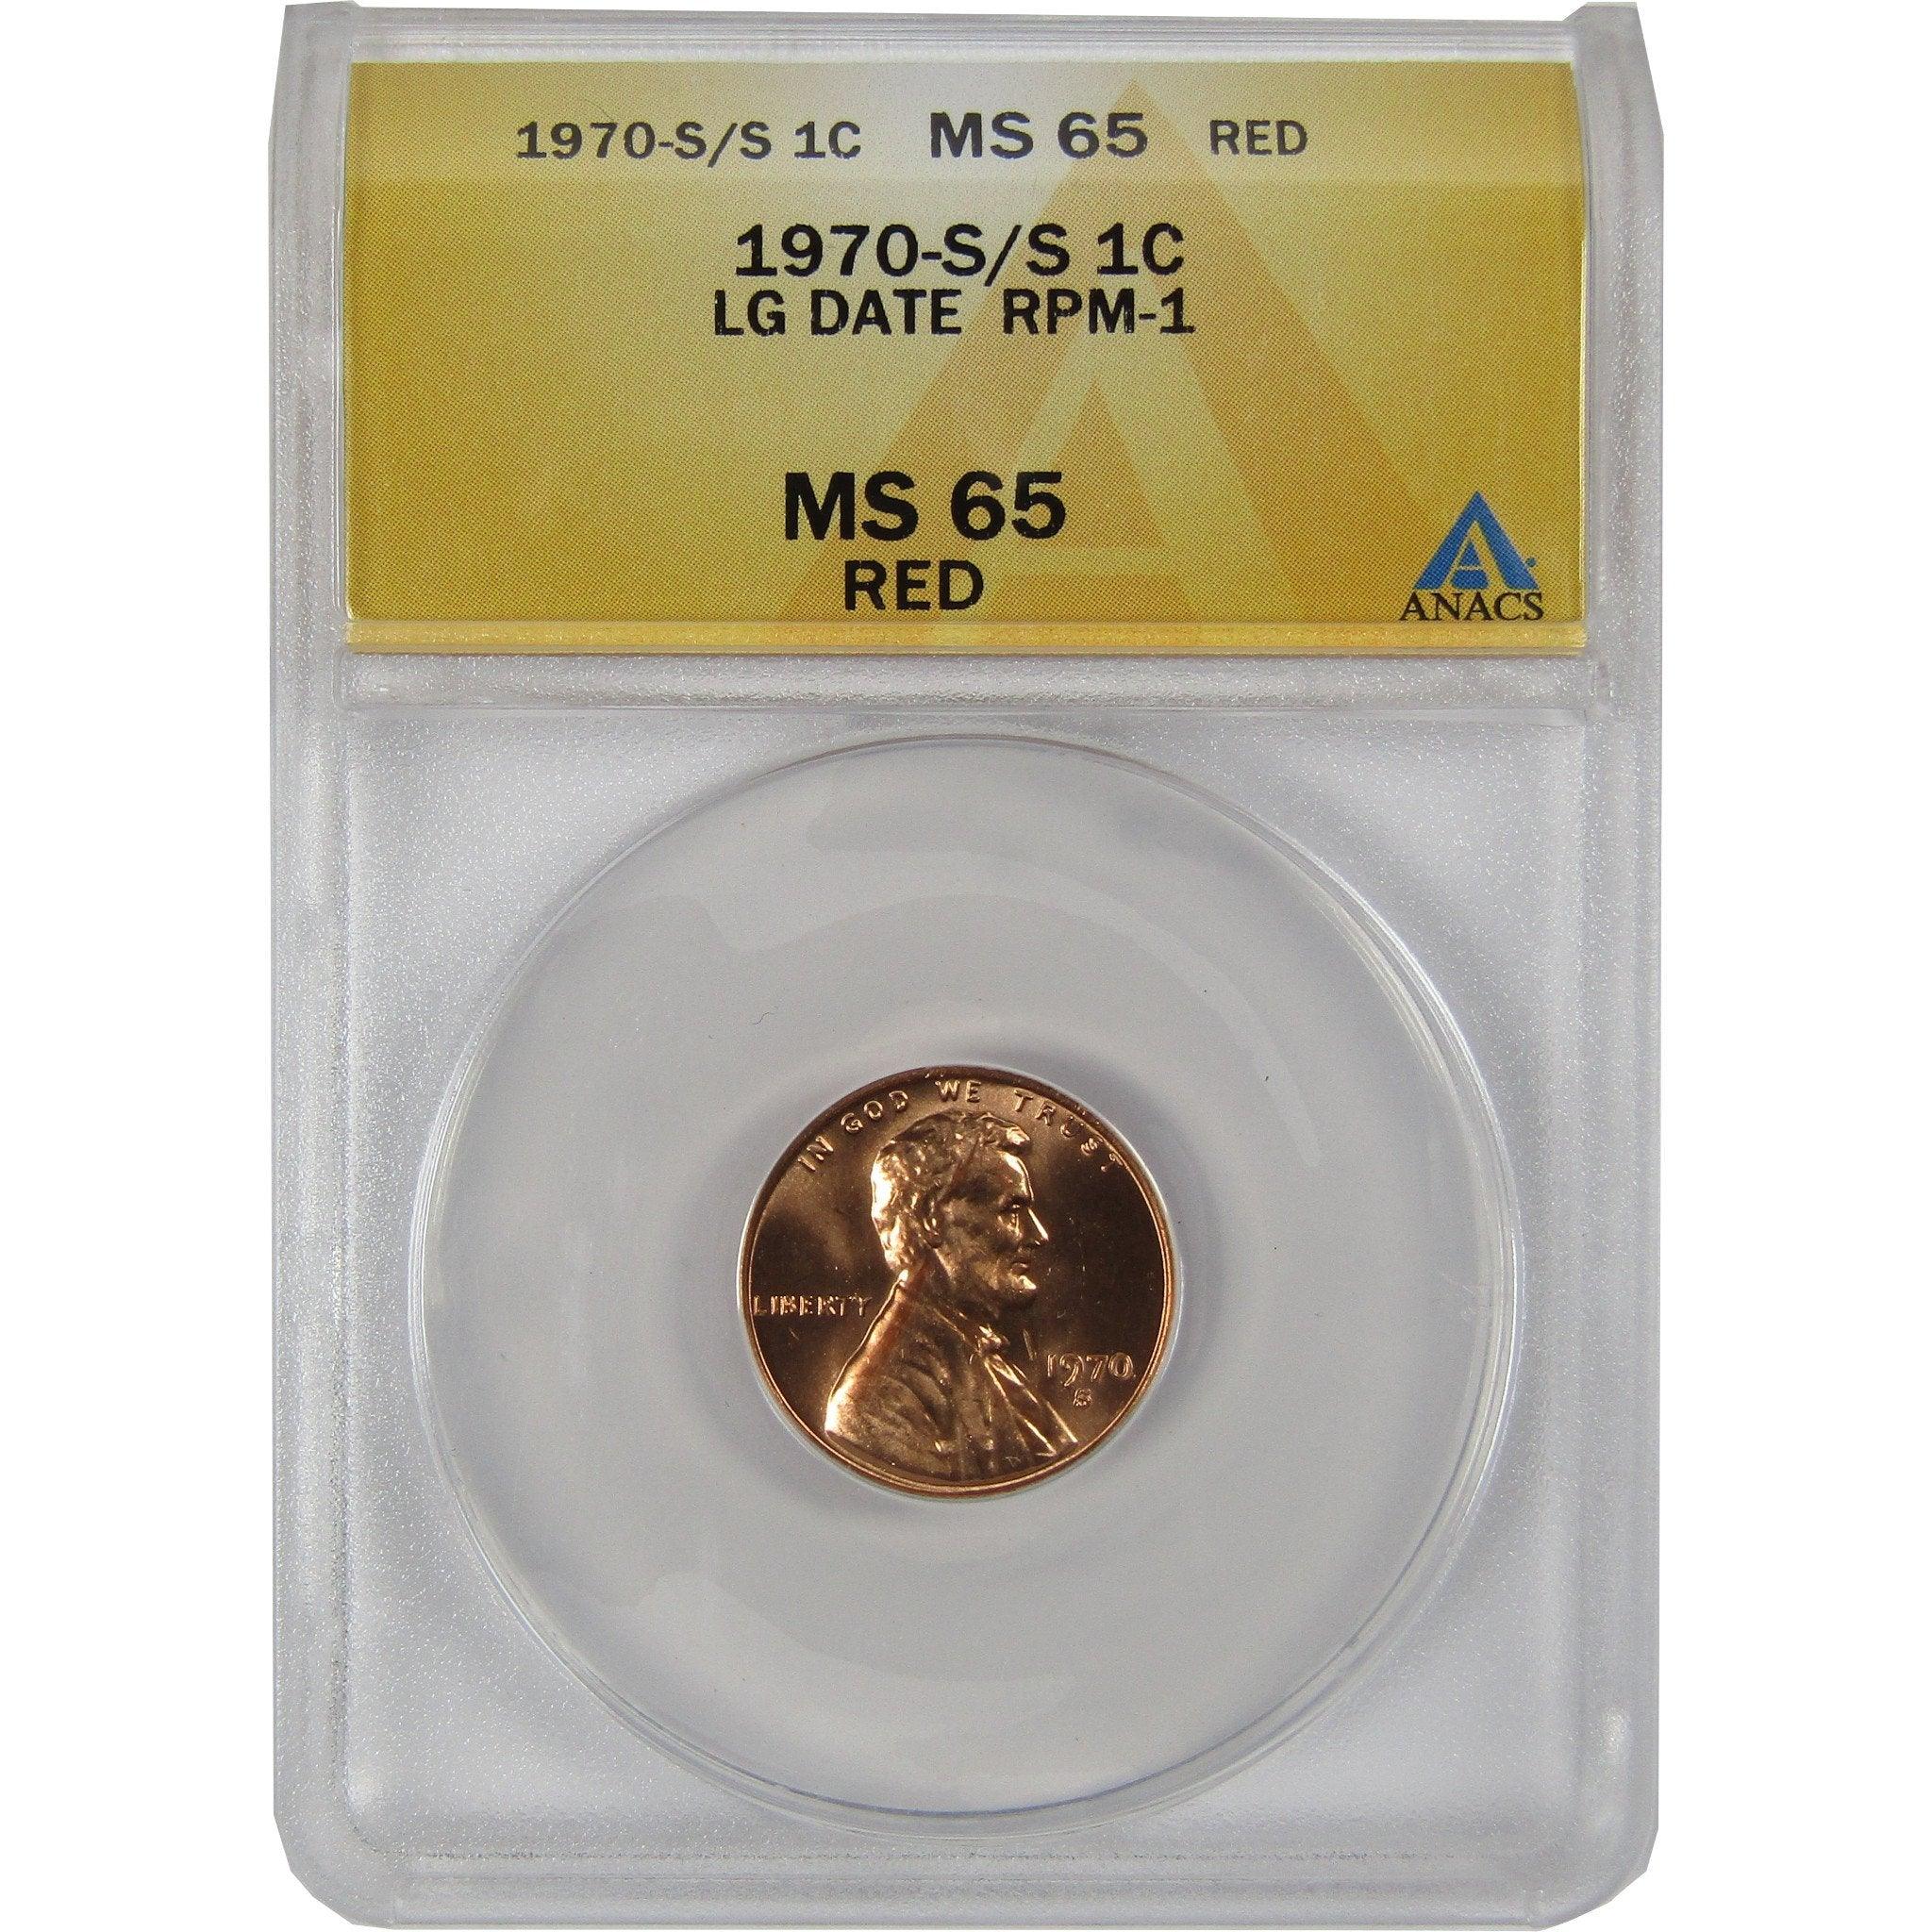 1970 S/S Lg Date Low 7 Lincoln Memorial Cent MS 65 ANACS SKU:CPC1085